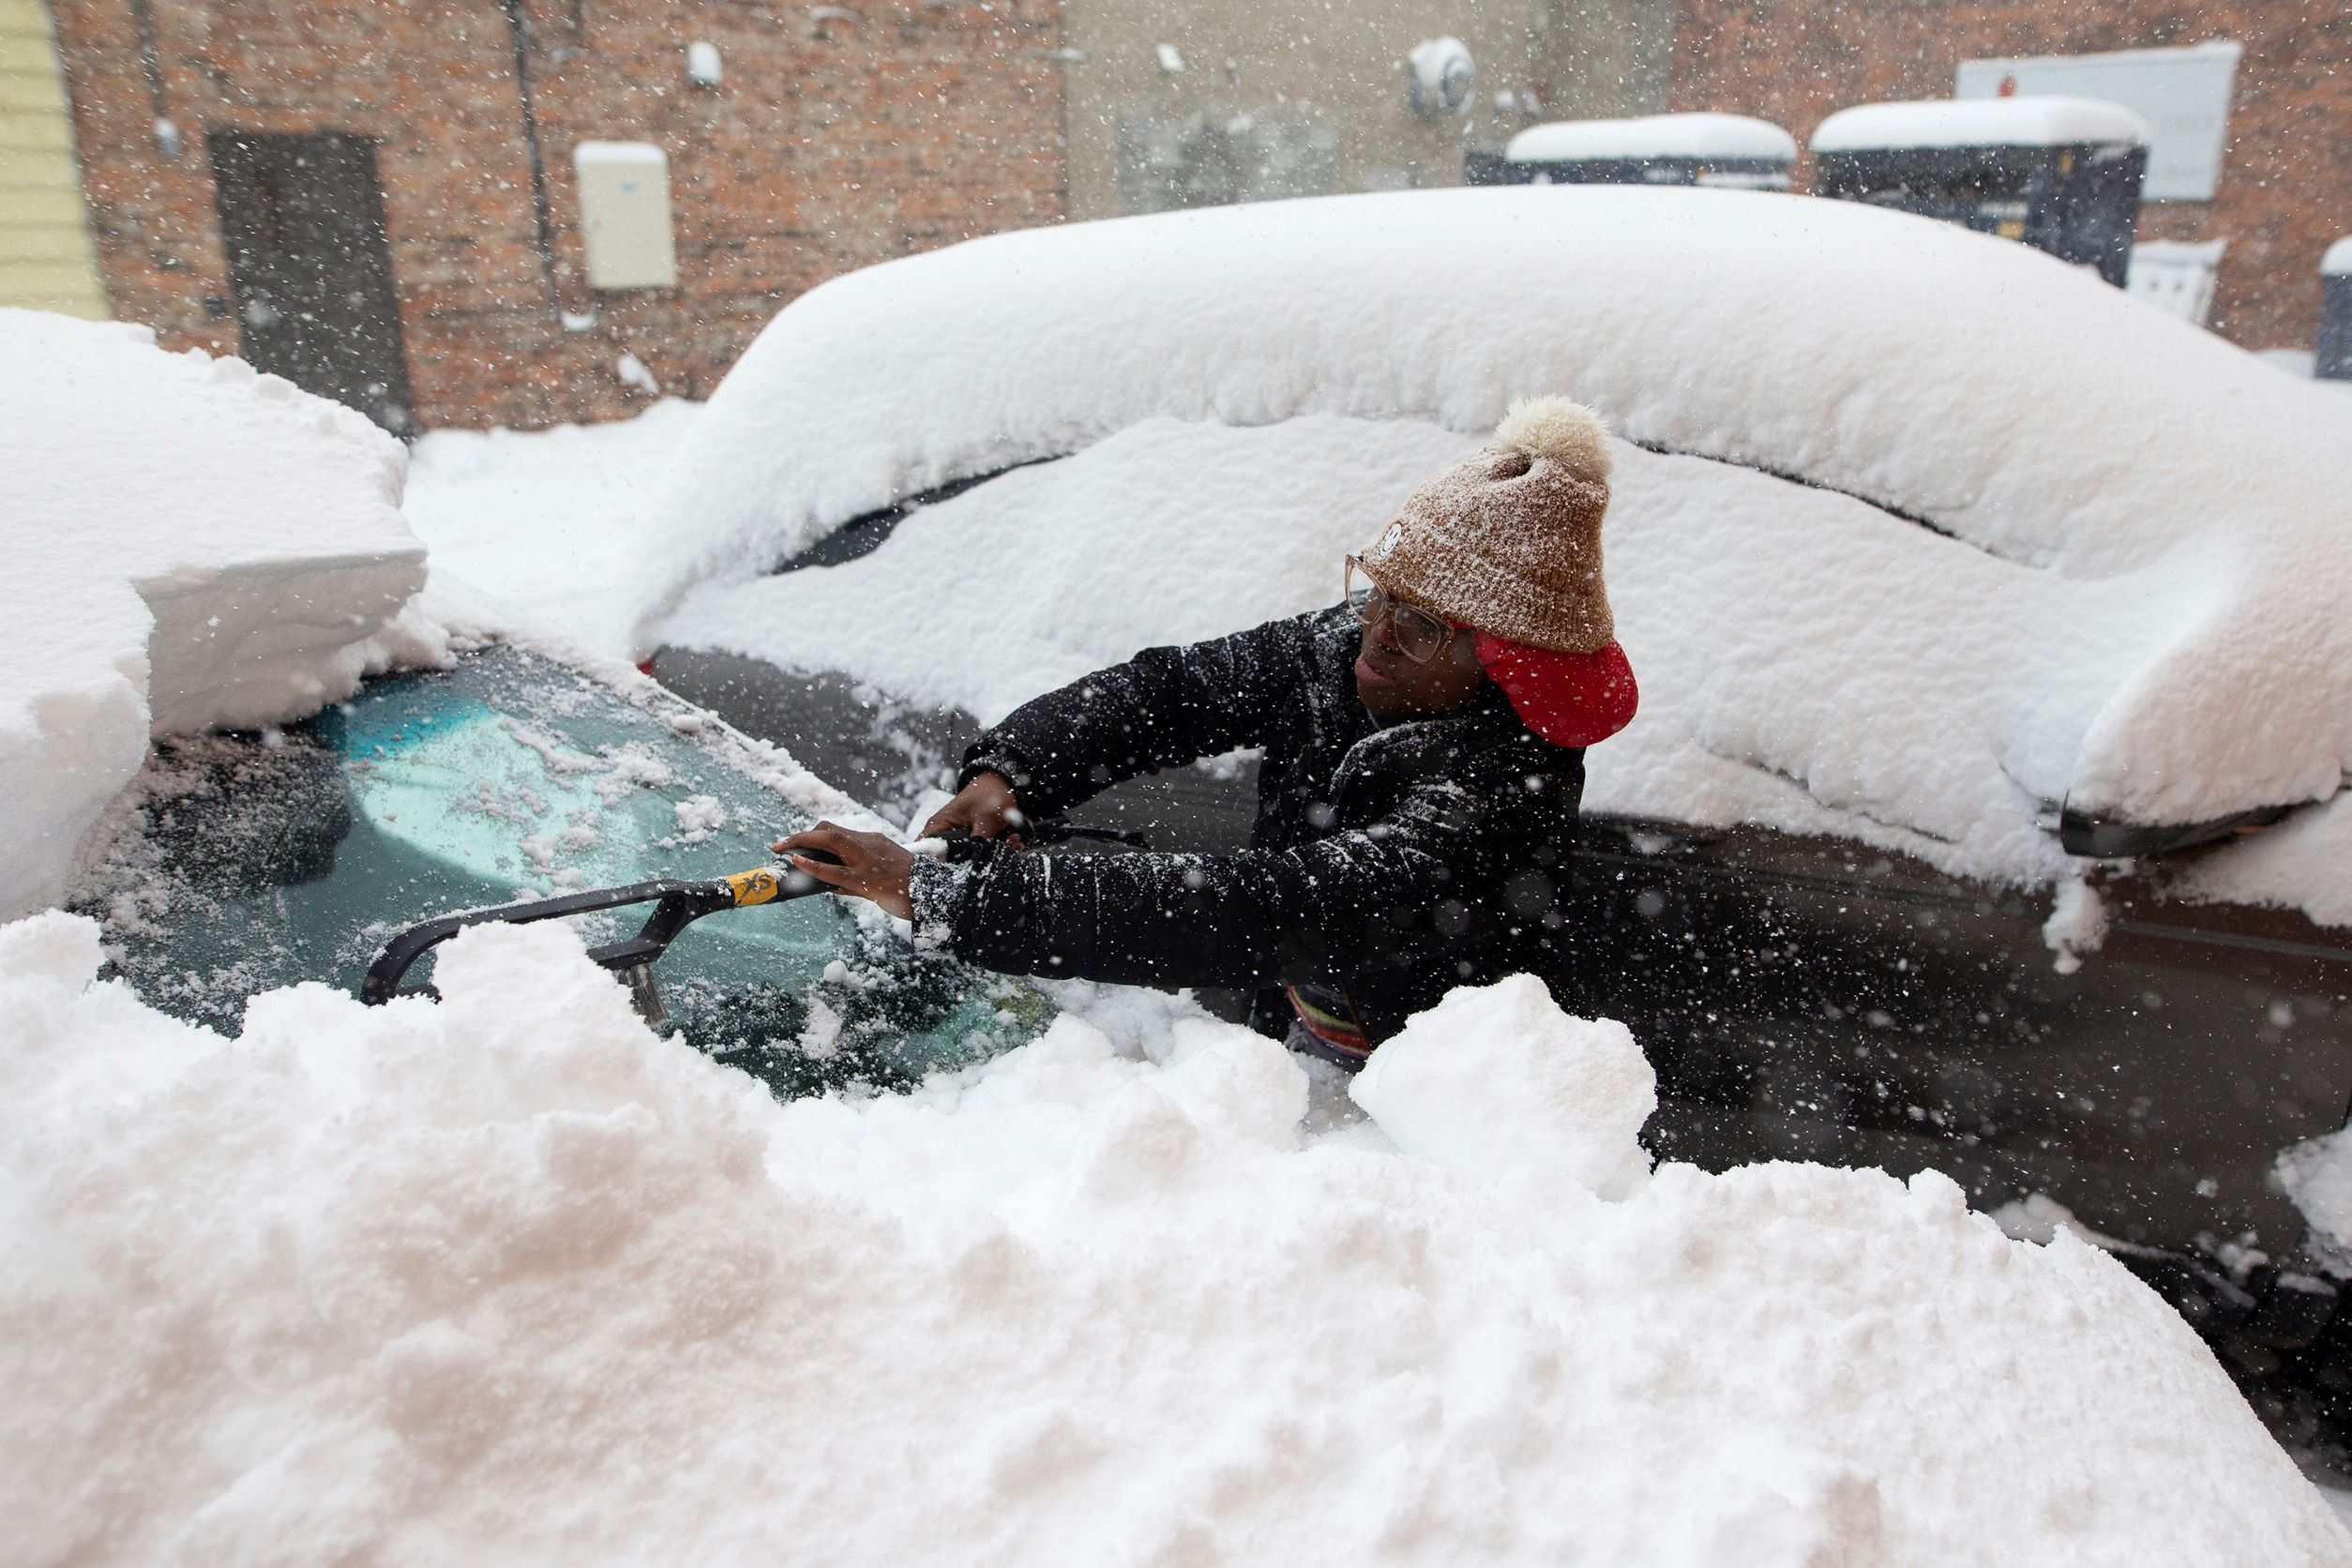 Lake-Effect Snow Paralyzes Parts of Western, Northern New York